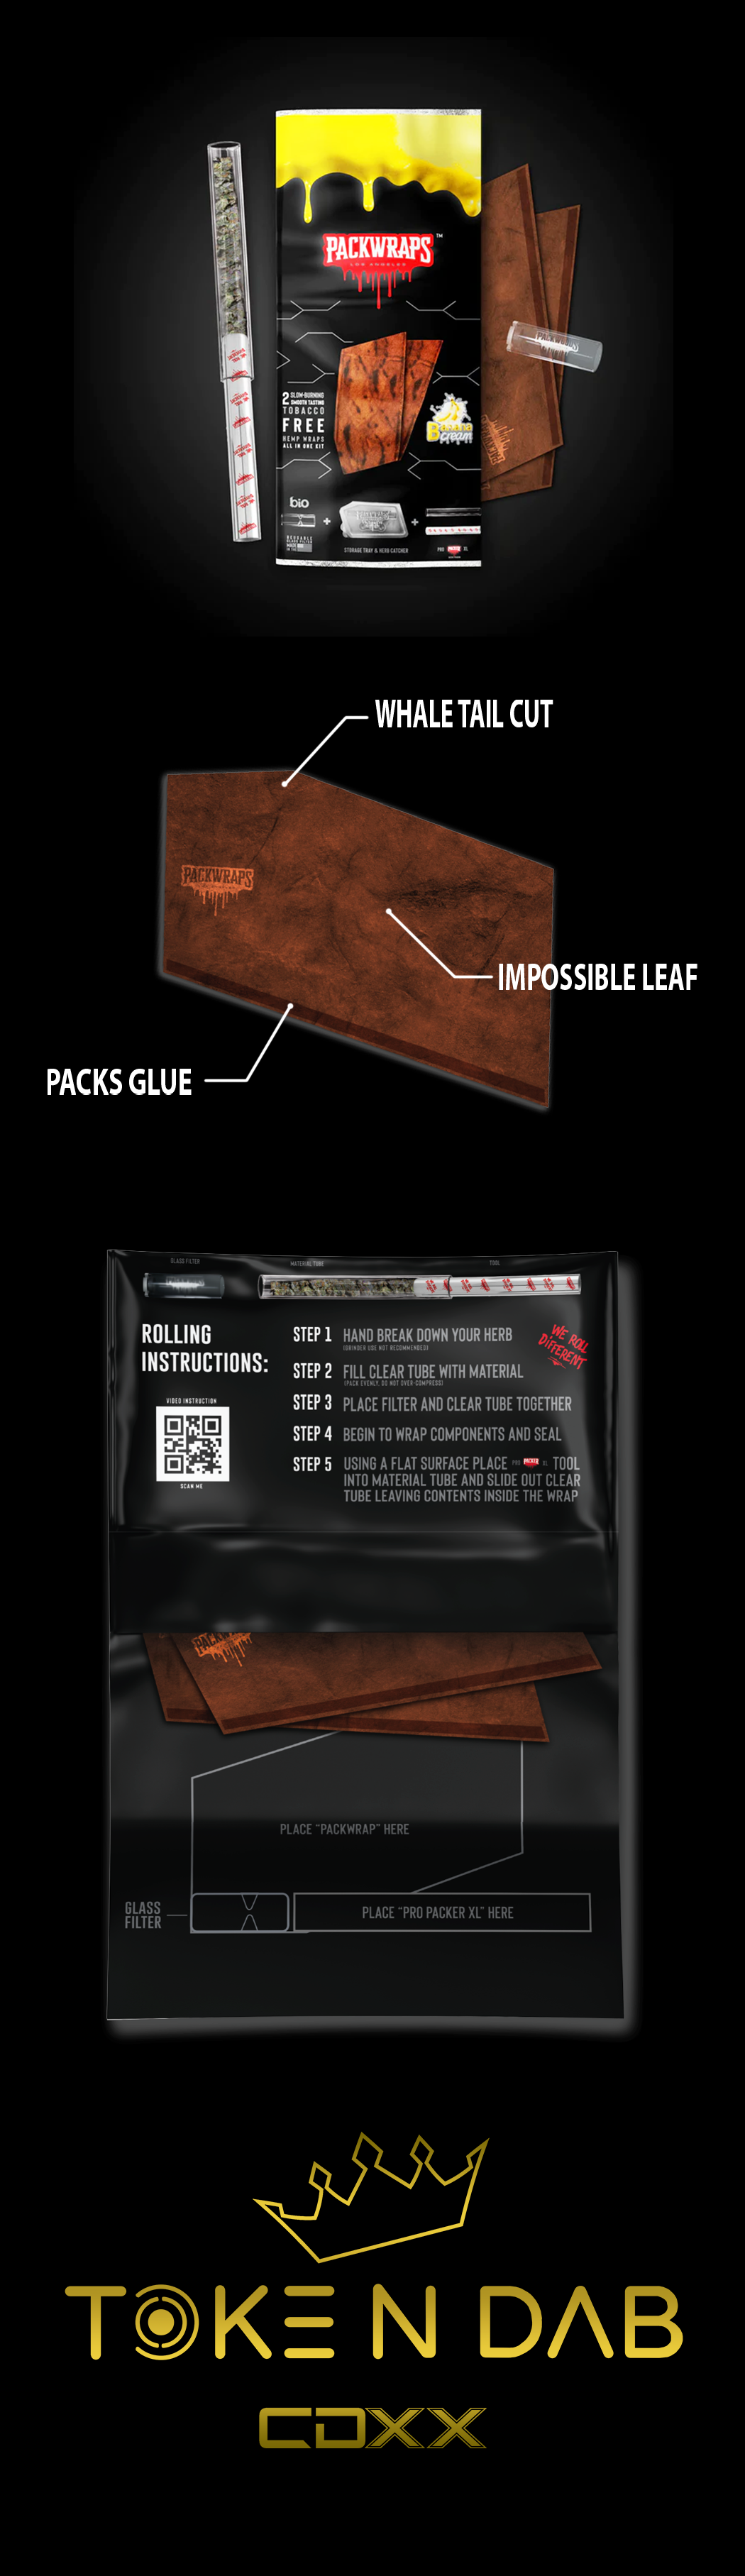 PackWraps Infographic